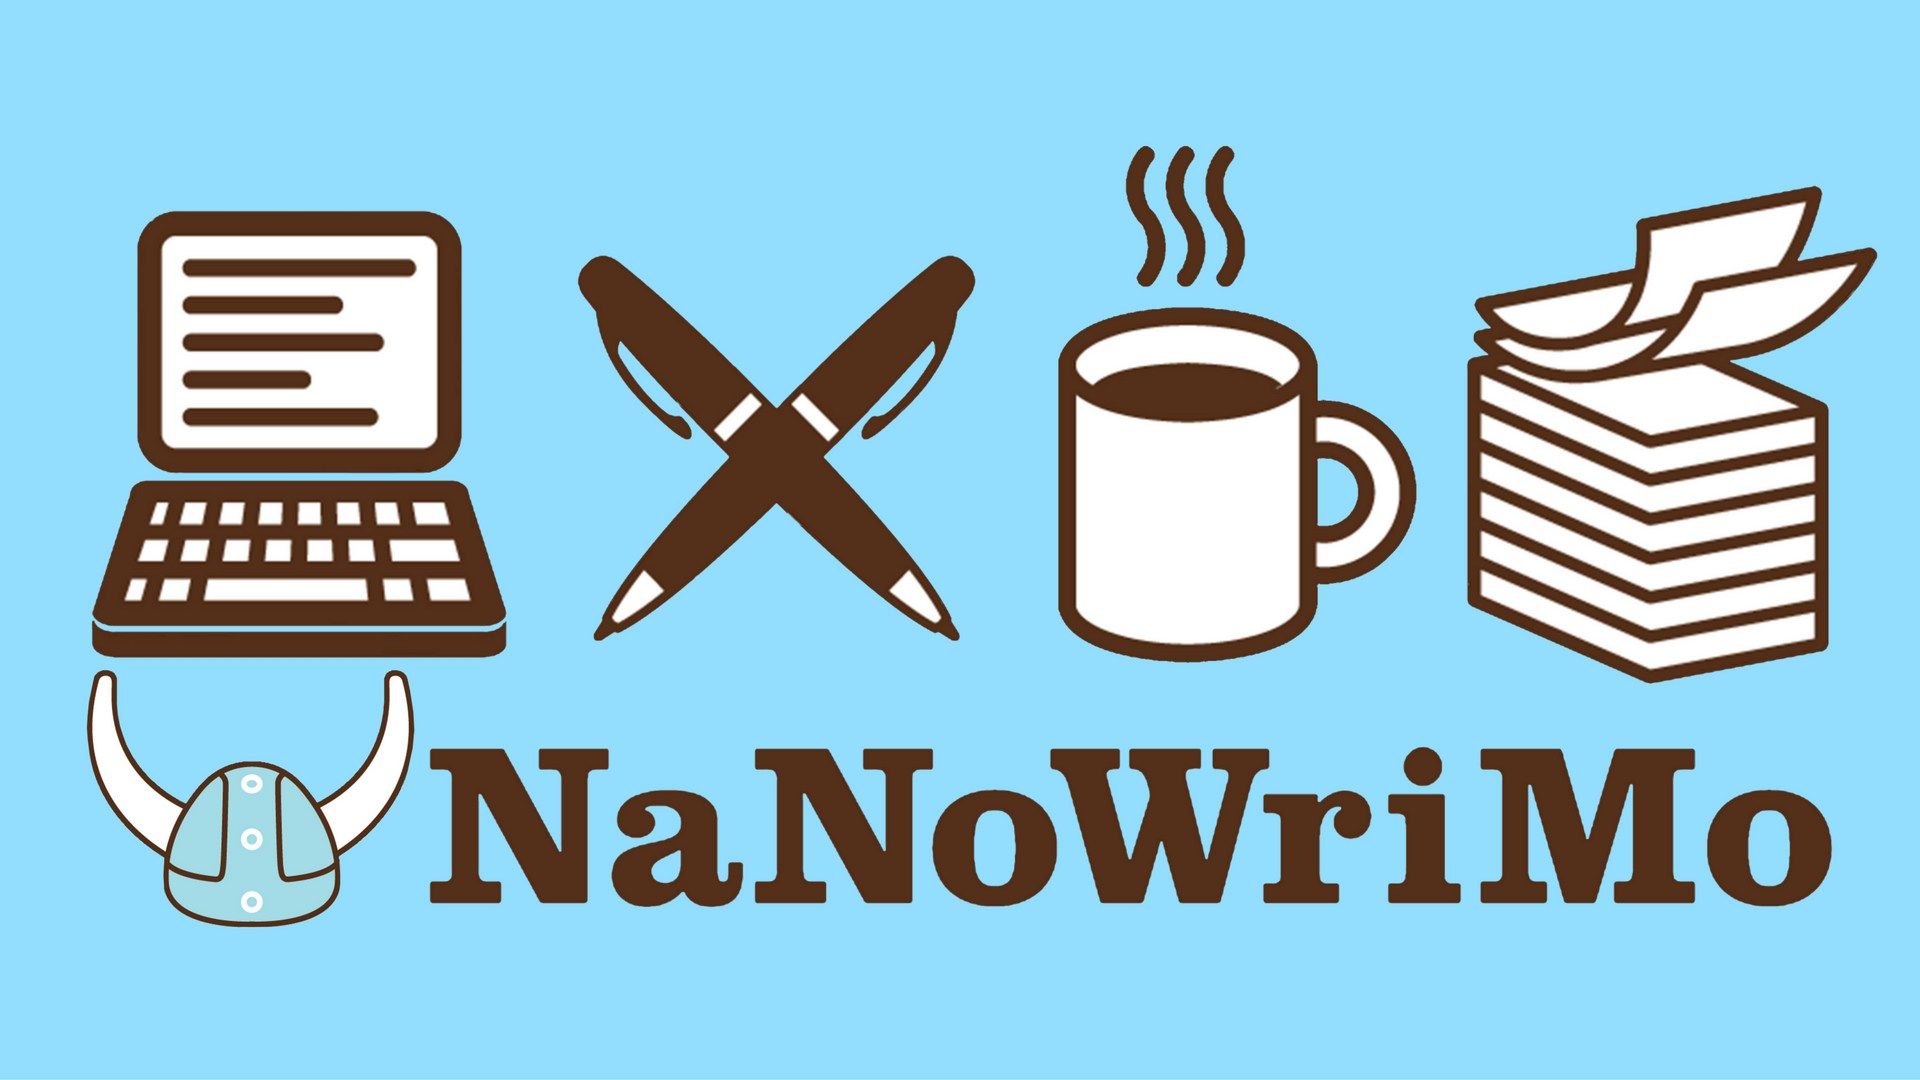 Did You Know About NaNoWriMo?